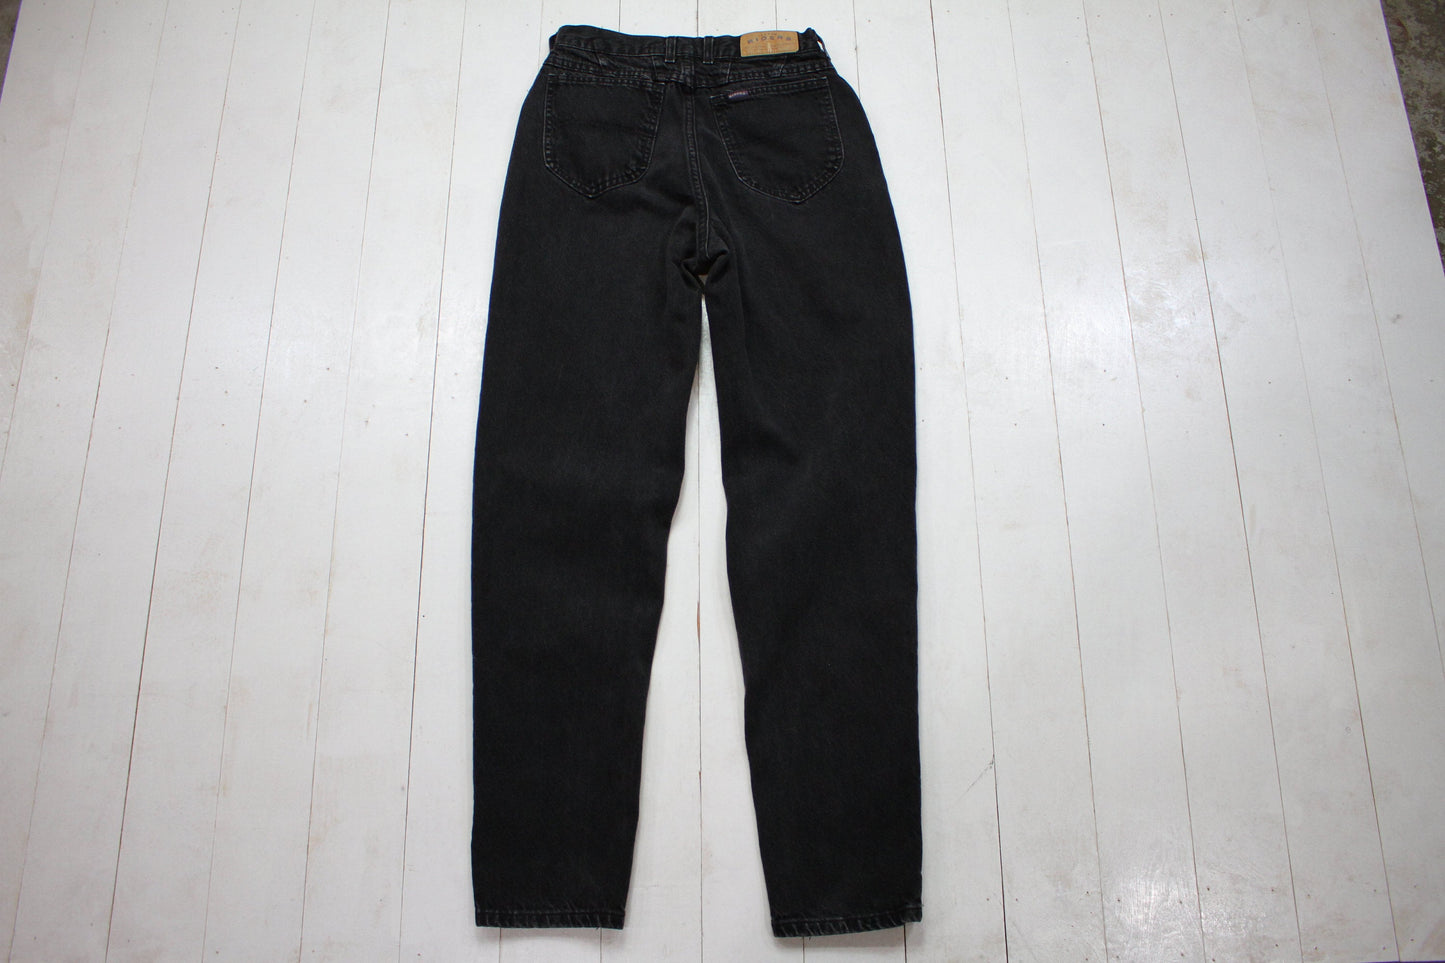 1990s Riders Faded Black Denim Jeans Made in USA Size 26x31